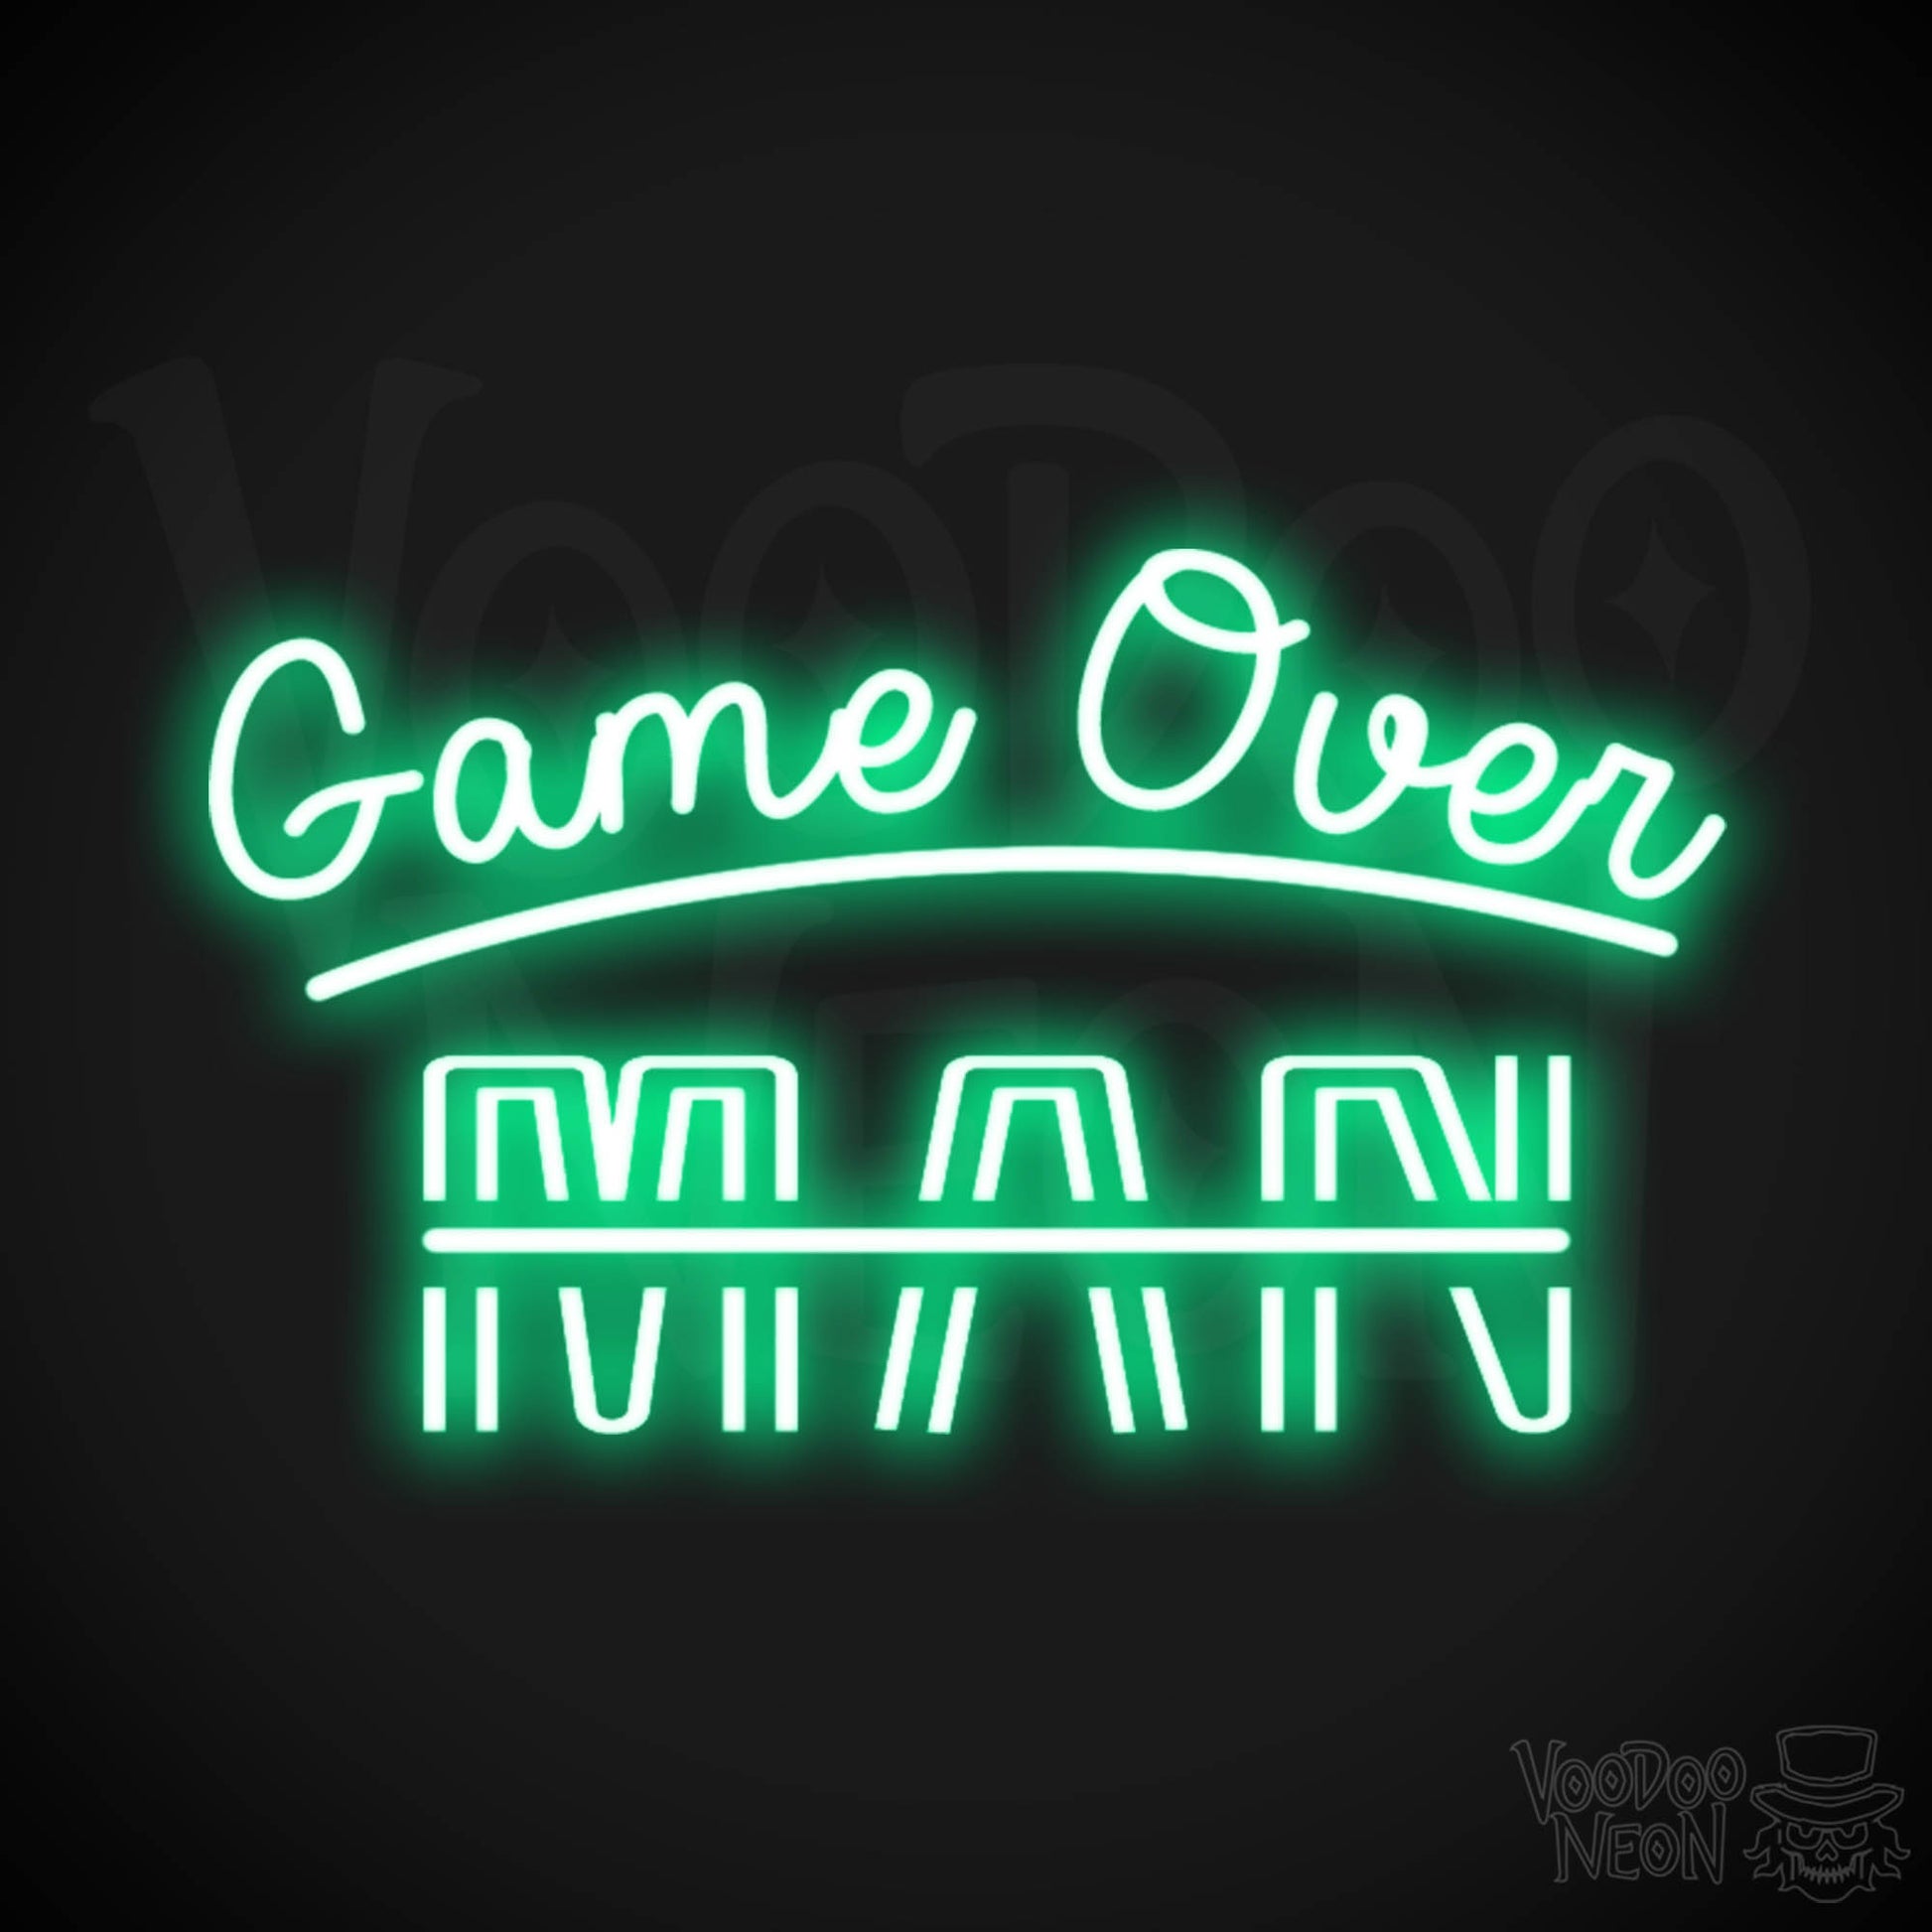 Game Over Man Neon Sign - Game Over Man Light Up Sign - Wall Art - Color Green